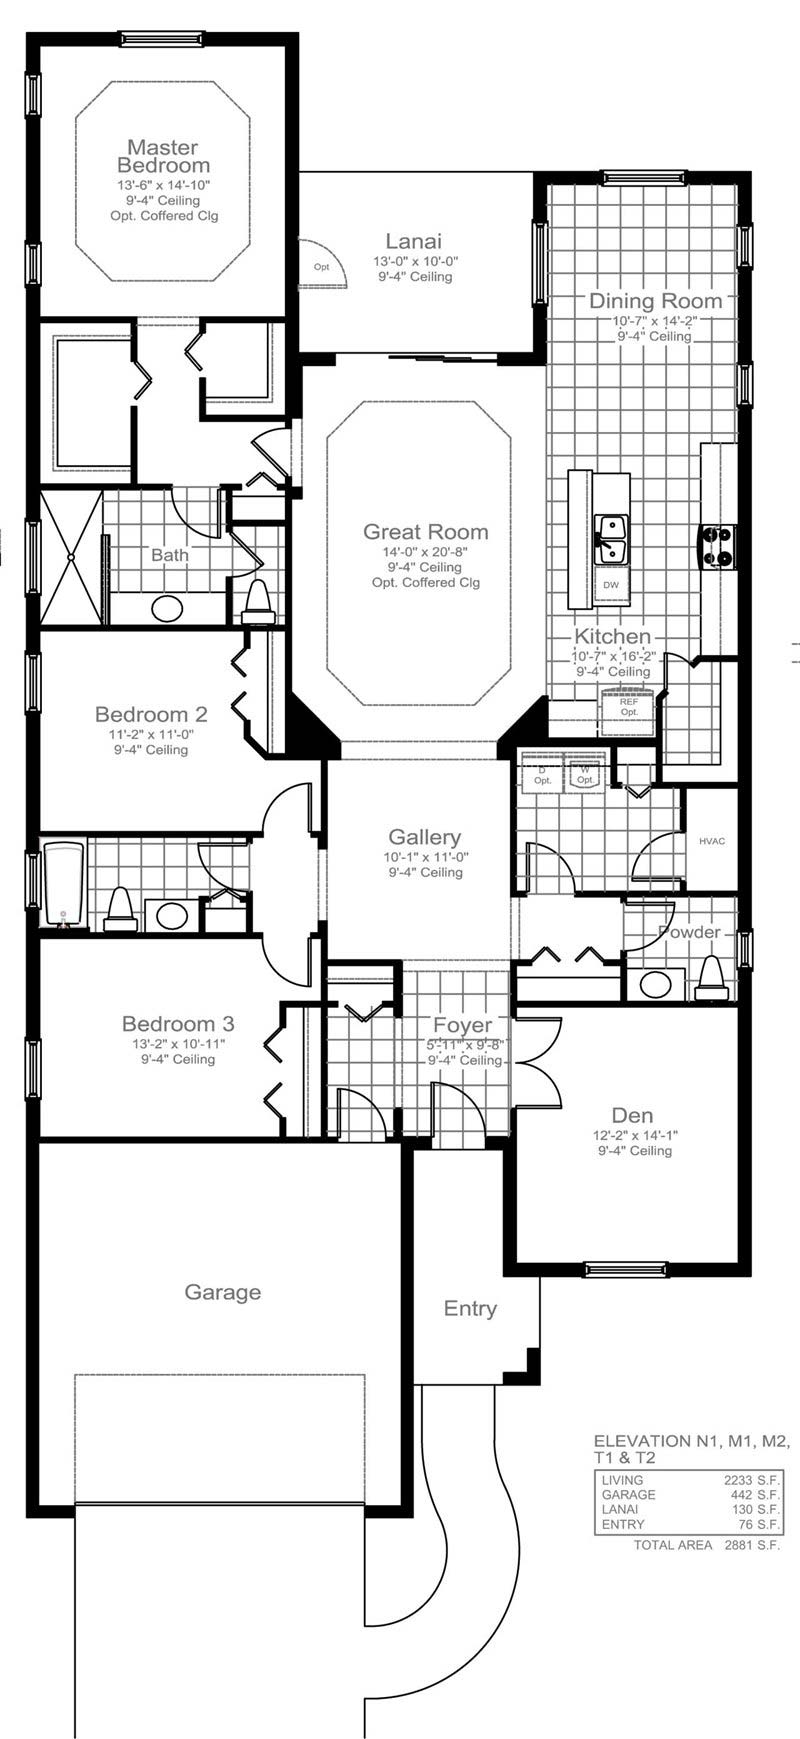 Starlight Floor Plan in Canopy, Naples by Neal Communities, 3 Bedrooms, 2.5 Bathrooms, 2 Car garage, 2,233 Square feet, 1 Story home